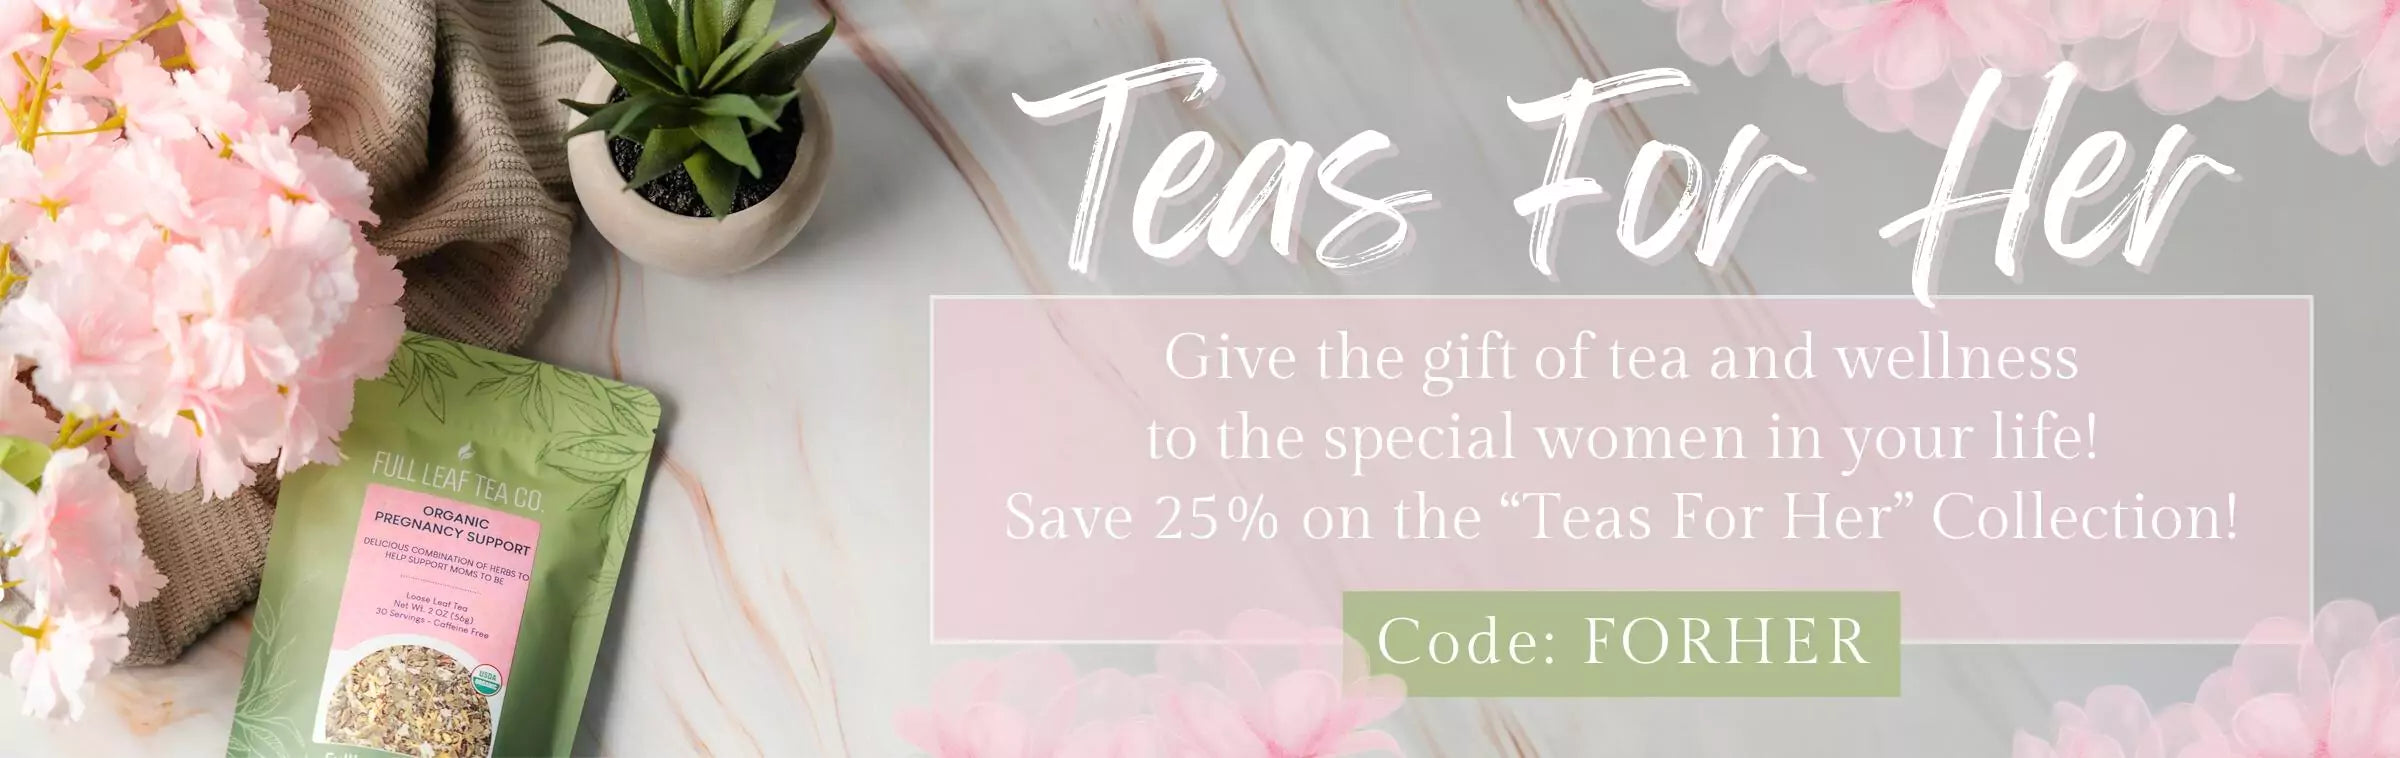 Teas for her web banner